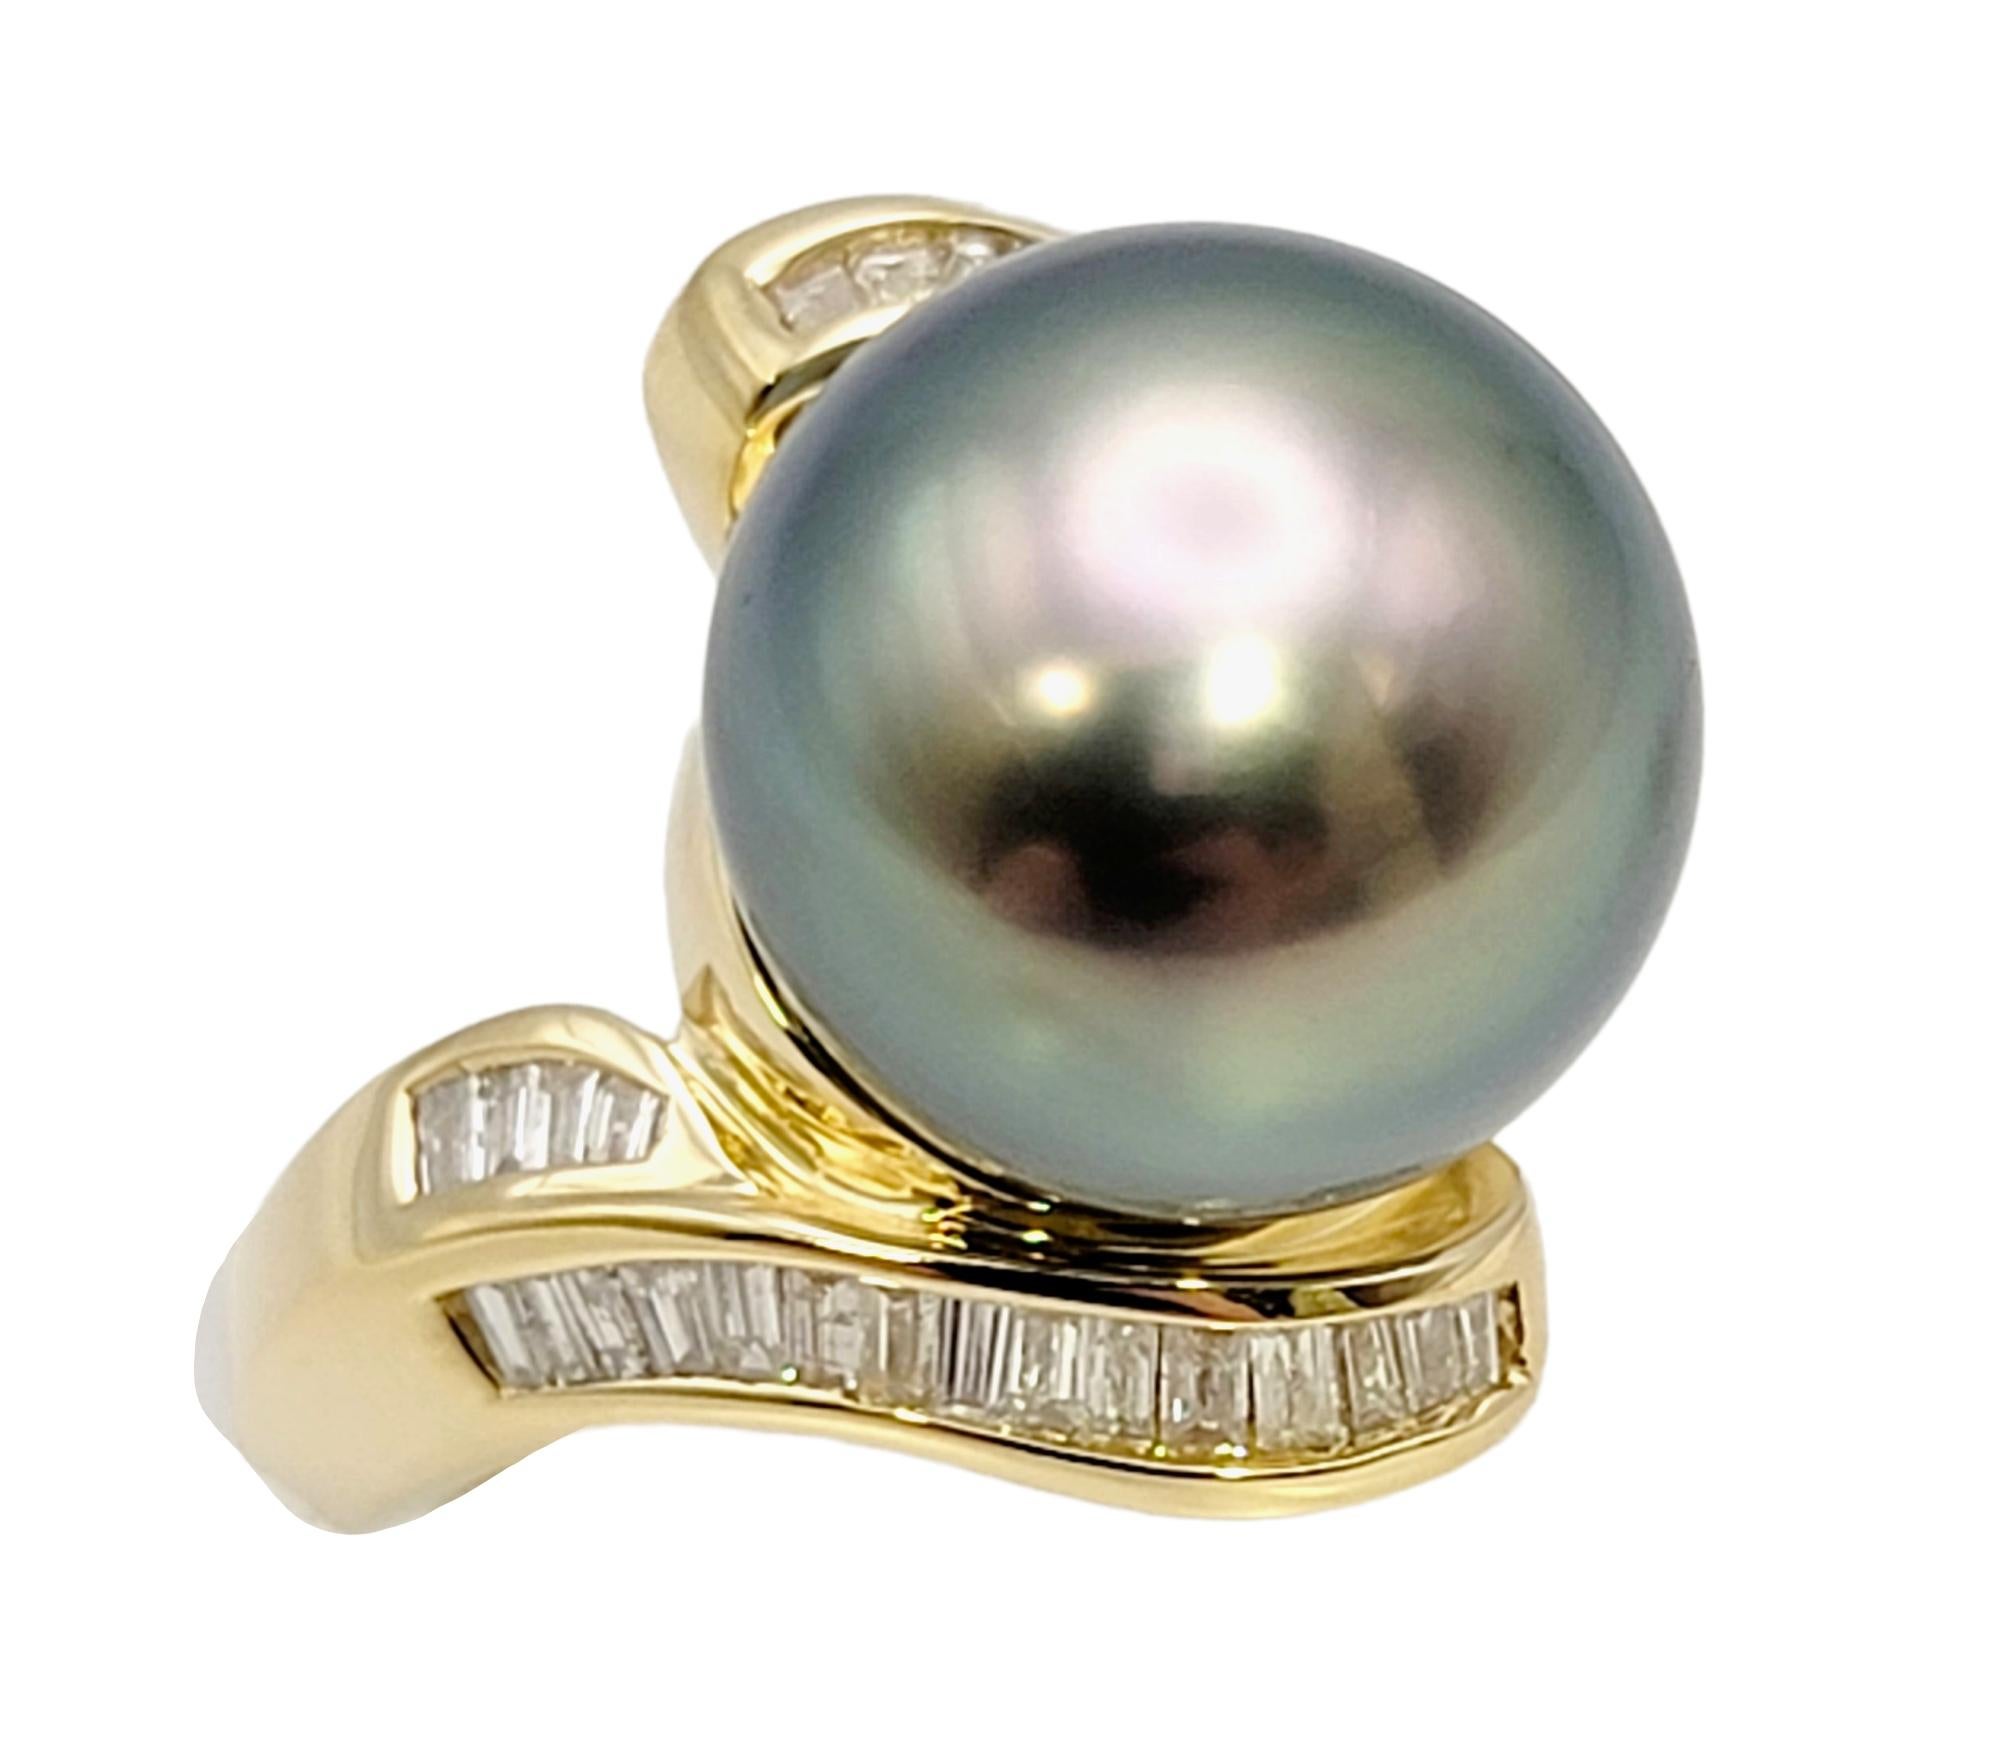 Ring size: 7.5

Sophisticated and elegant Tahitian pearl and diamond statement ring. The incredible, round peacock colored 13 mm pearl sits high at the center, demanding the viewers attention. Gently wrapping the base of the pearl in a modern bypass